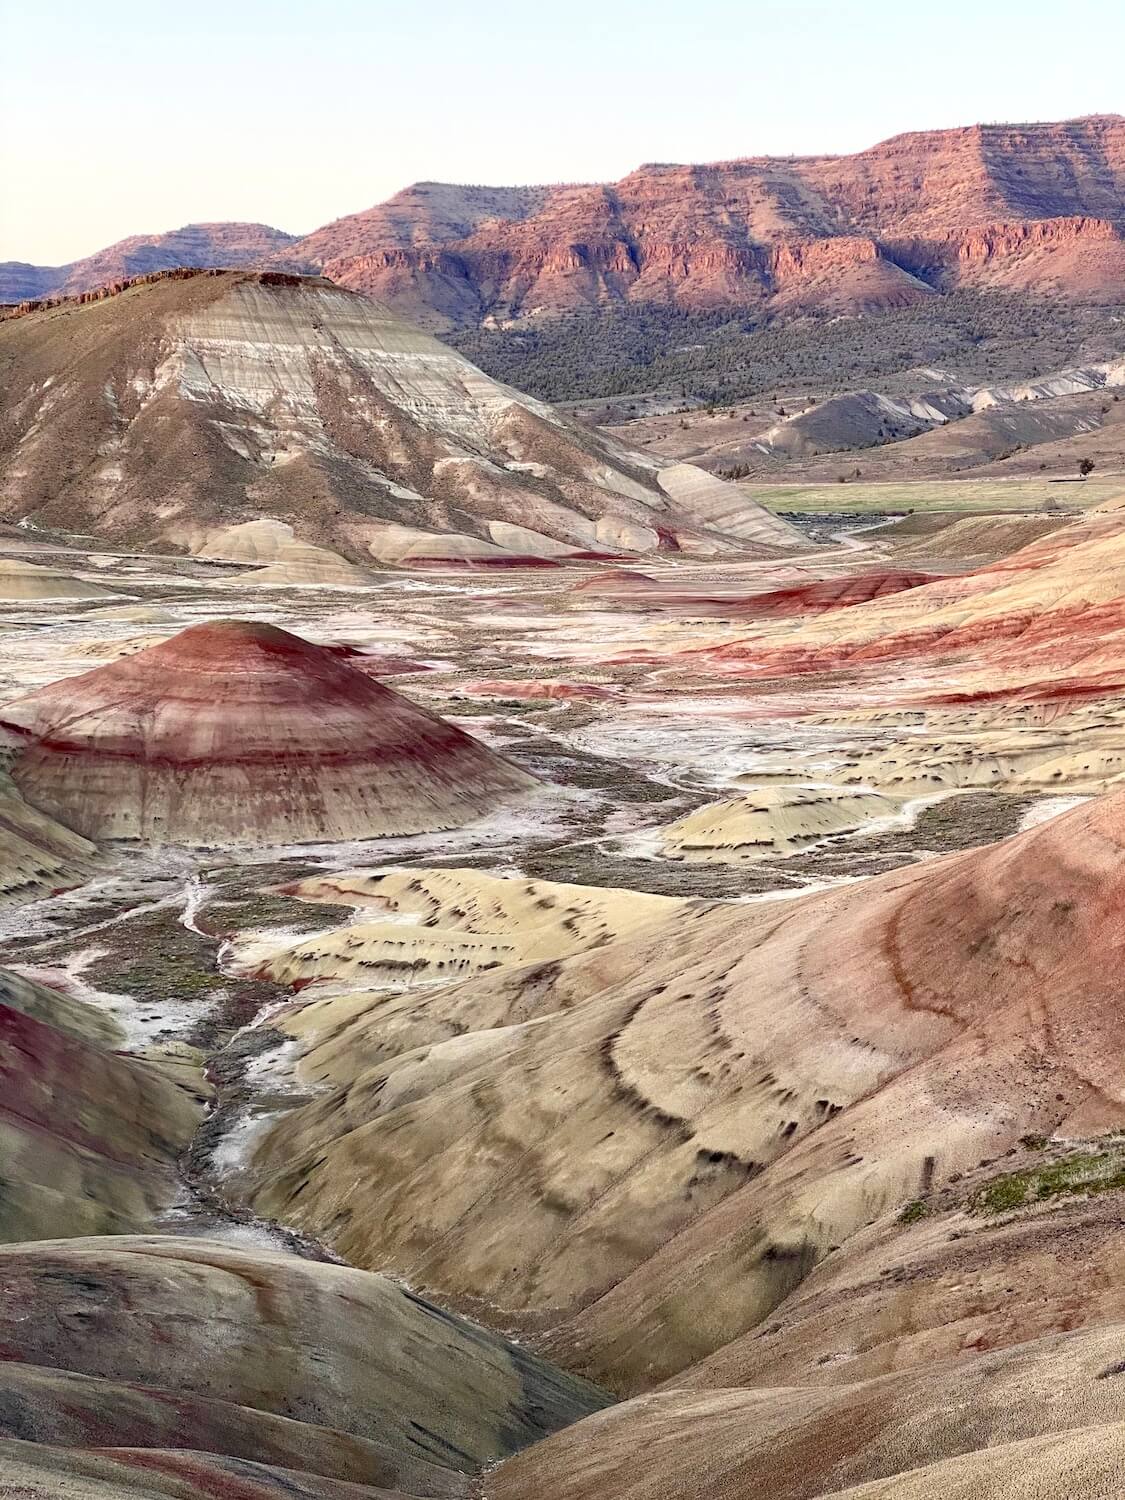 This is one of the highlights in the collection of Painted Hills Oregon photos.  The landscape feels like the moon, with bubbling red mounds that meet a valley floor covered in the white chalky substance.  The sunset shines on the ridge high above in the distance.  